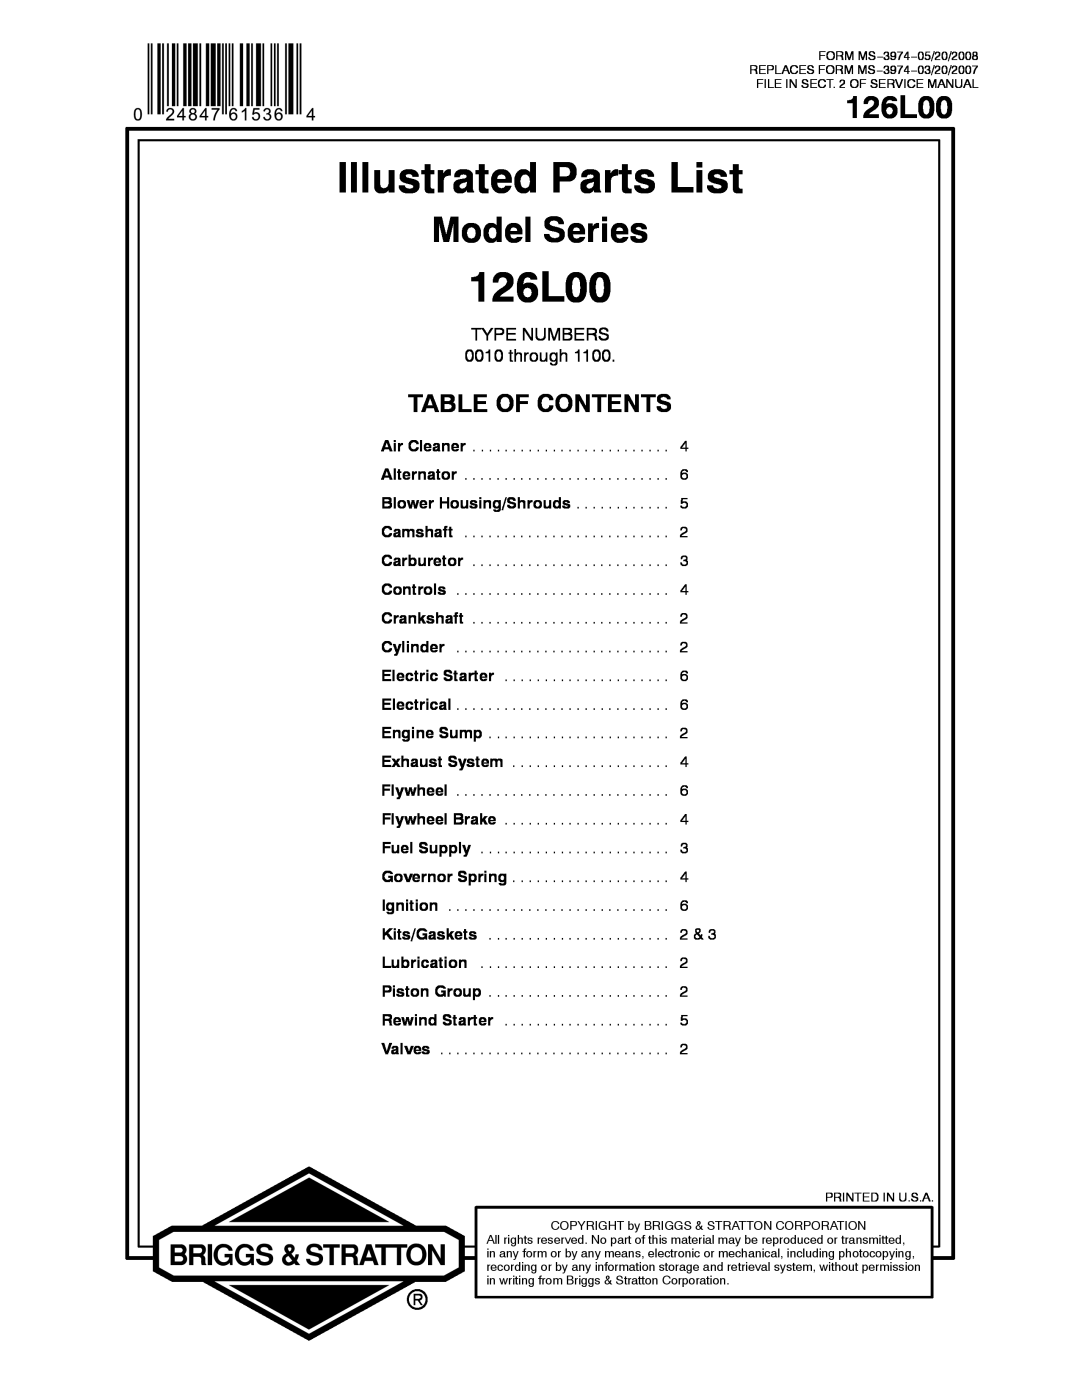 Snapper 126L00 service manual Illustrated Parts List, Model Series, Table Of Contents, TYPE NUMBERS 0010 through 